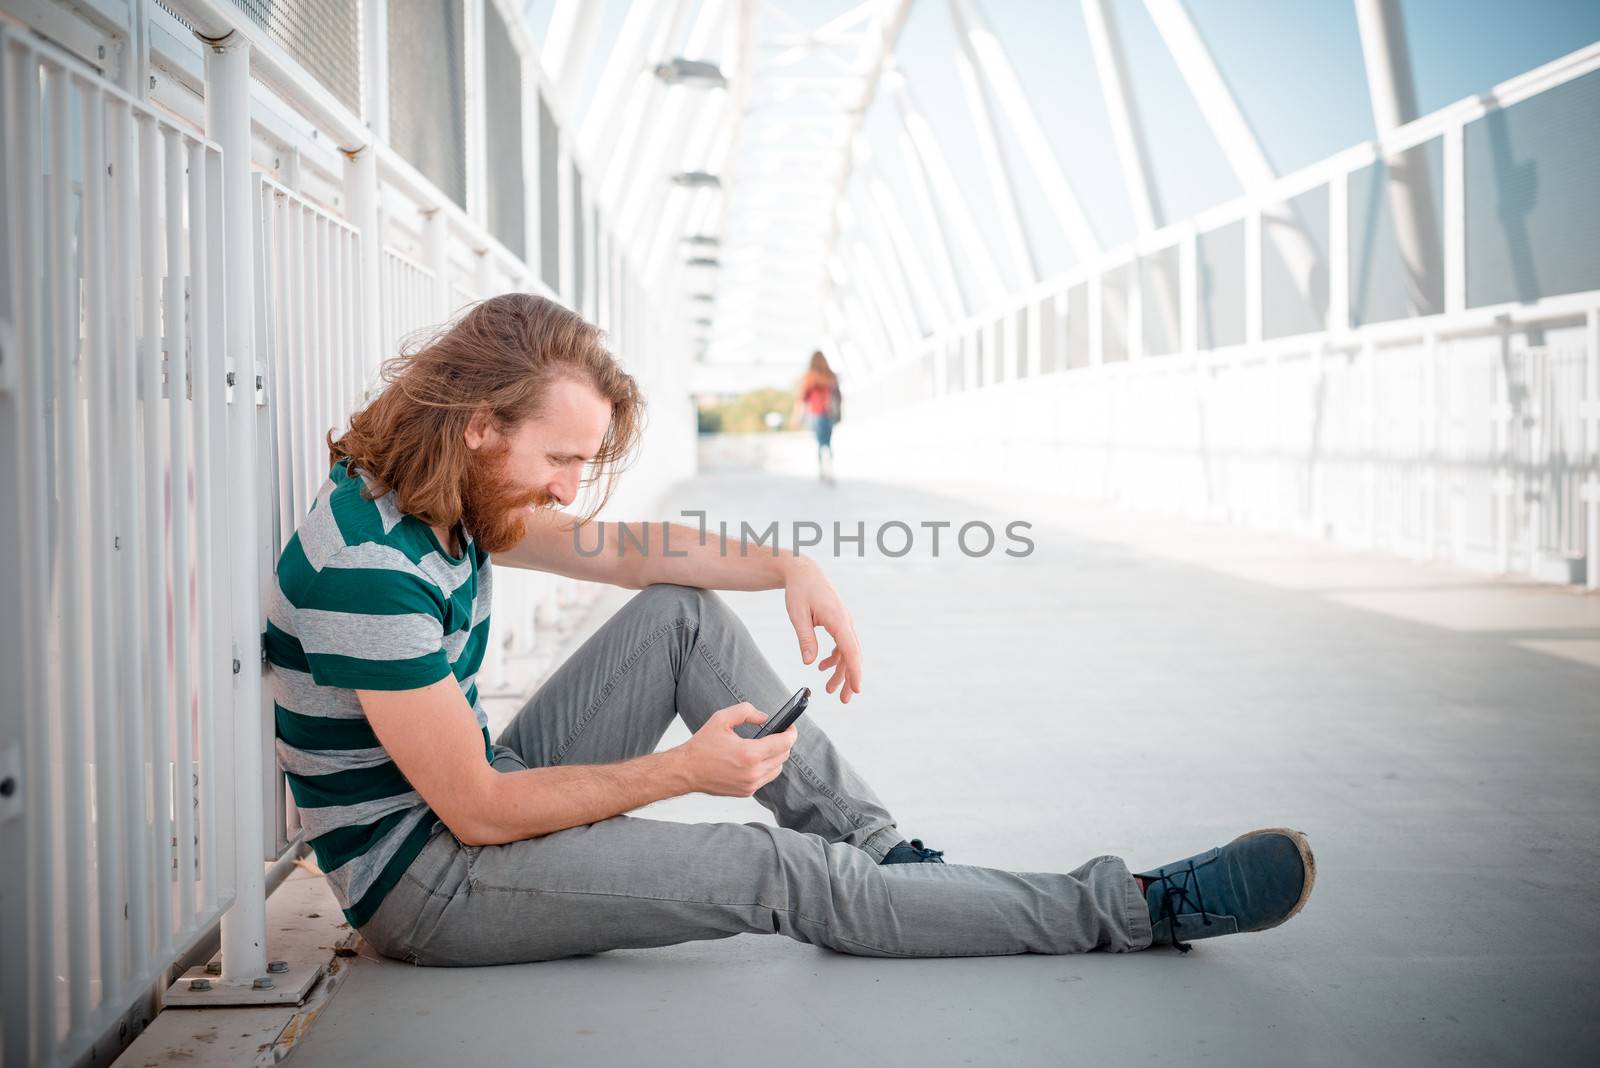 stylish hipster model with long red hair and beard lifestyle on the phone in the street